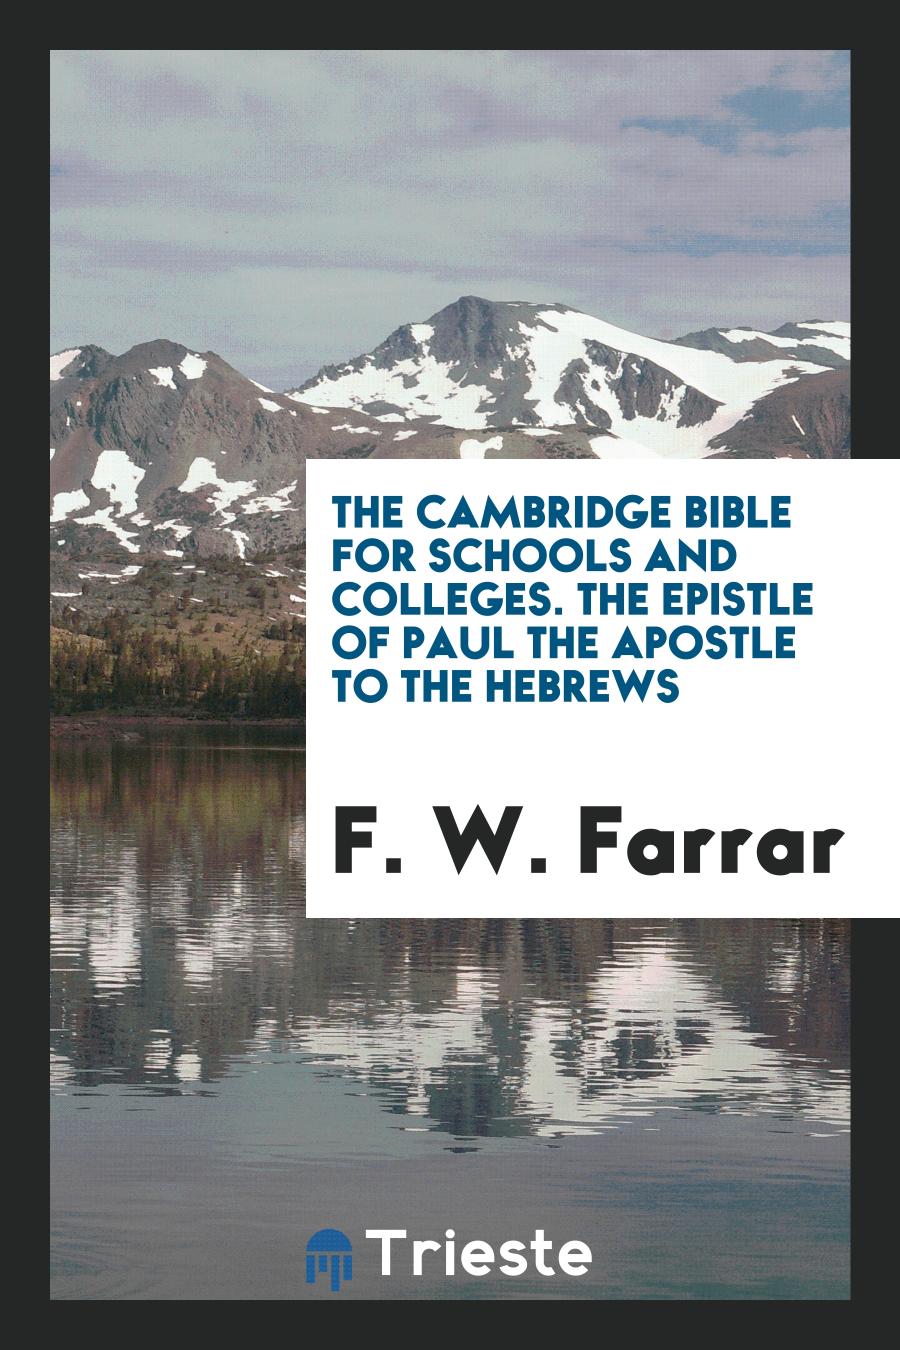 The Cambridge Bible for Schools and Colleges. The Epistle of Paul the Apostle to the Hebrews